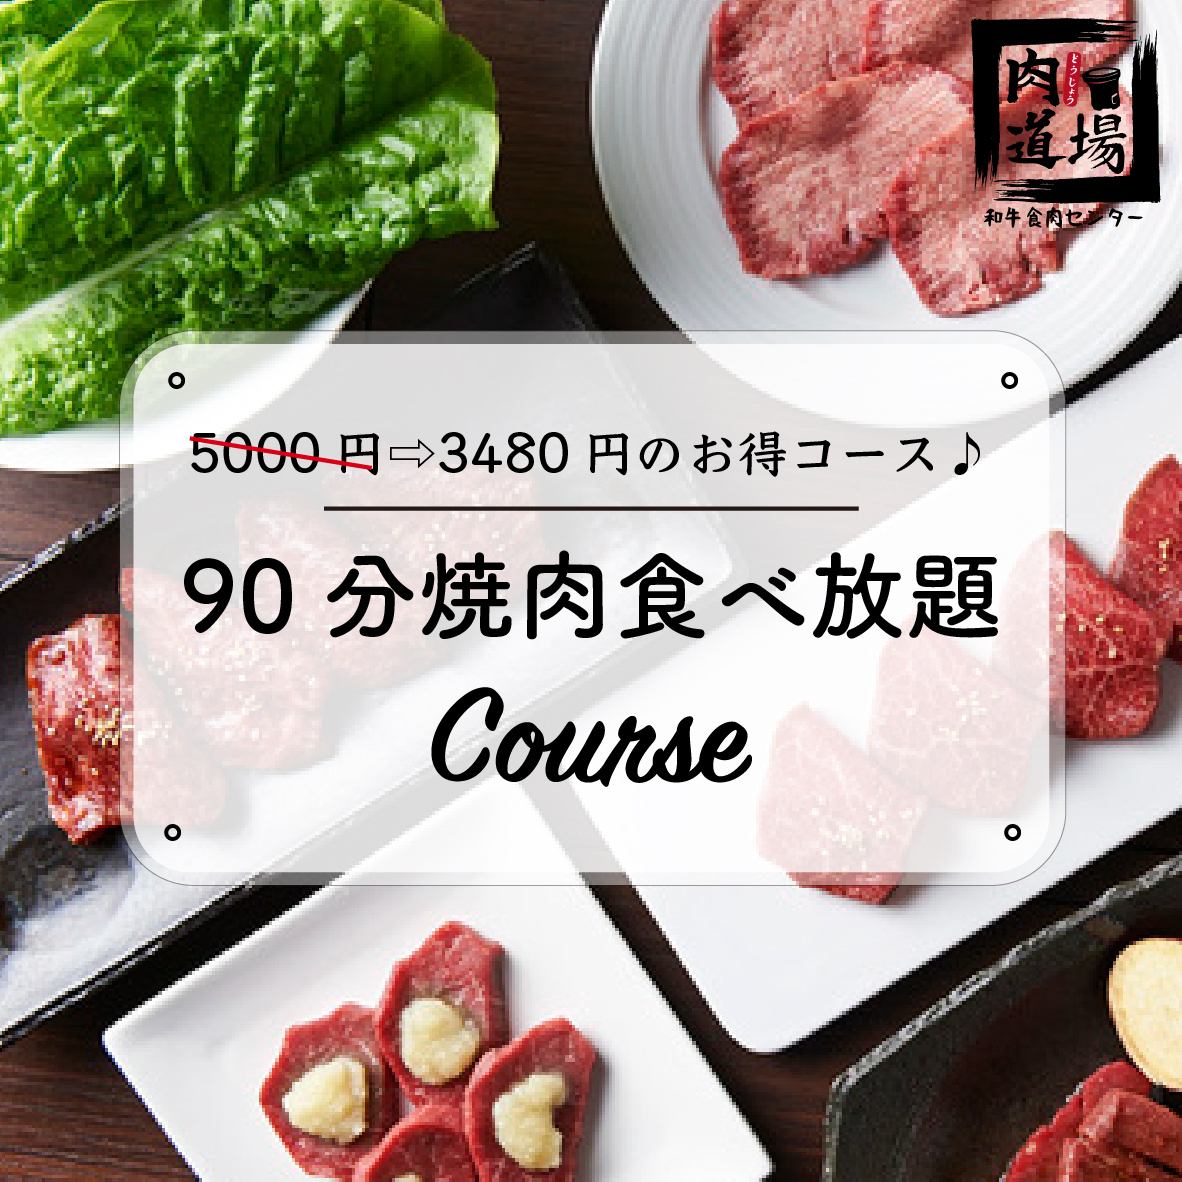 "Meat Dojo Simple Course" ★ All-you-can-eat course for 90 minutes ★ 3,480 yen